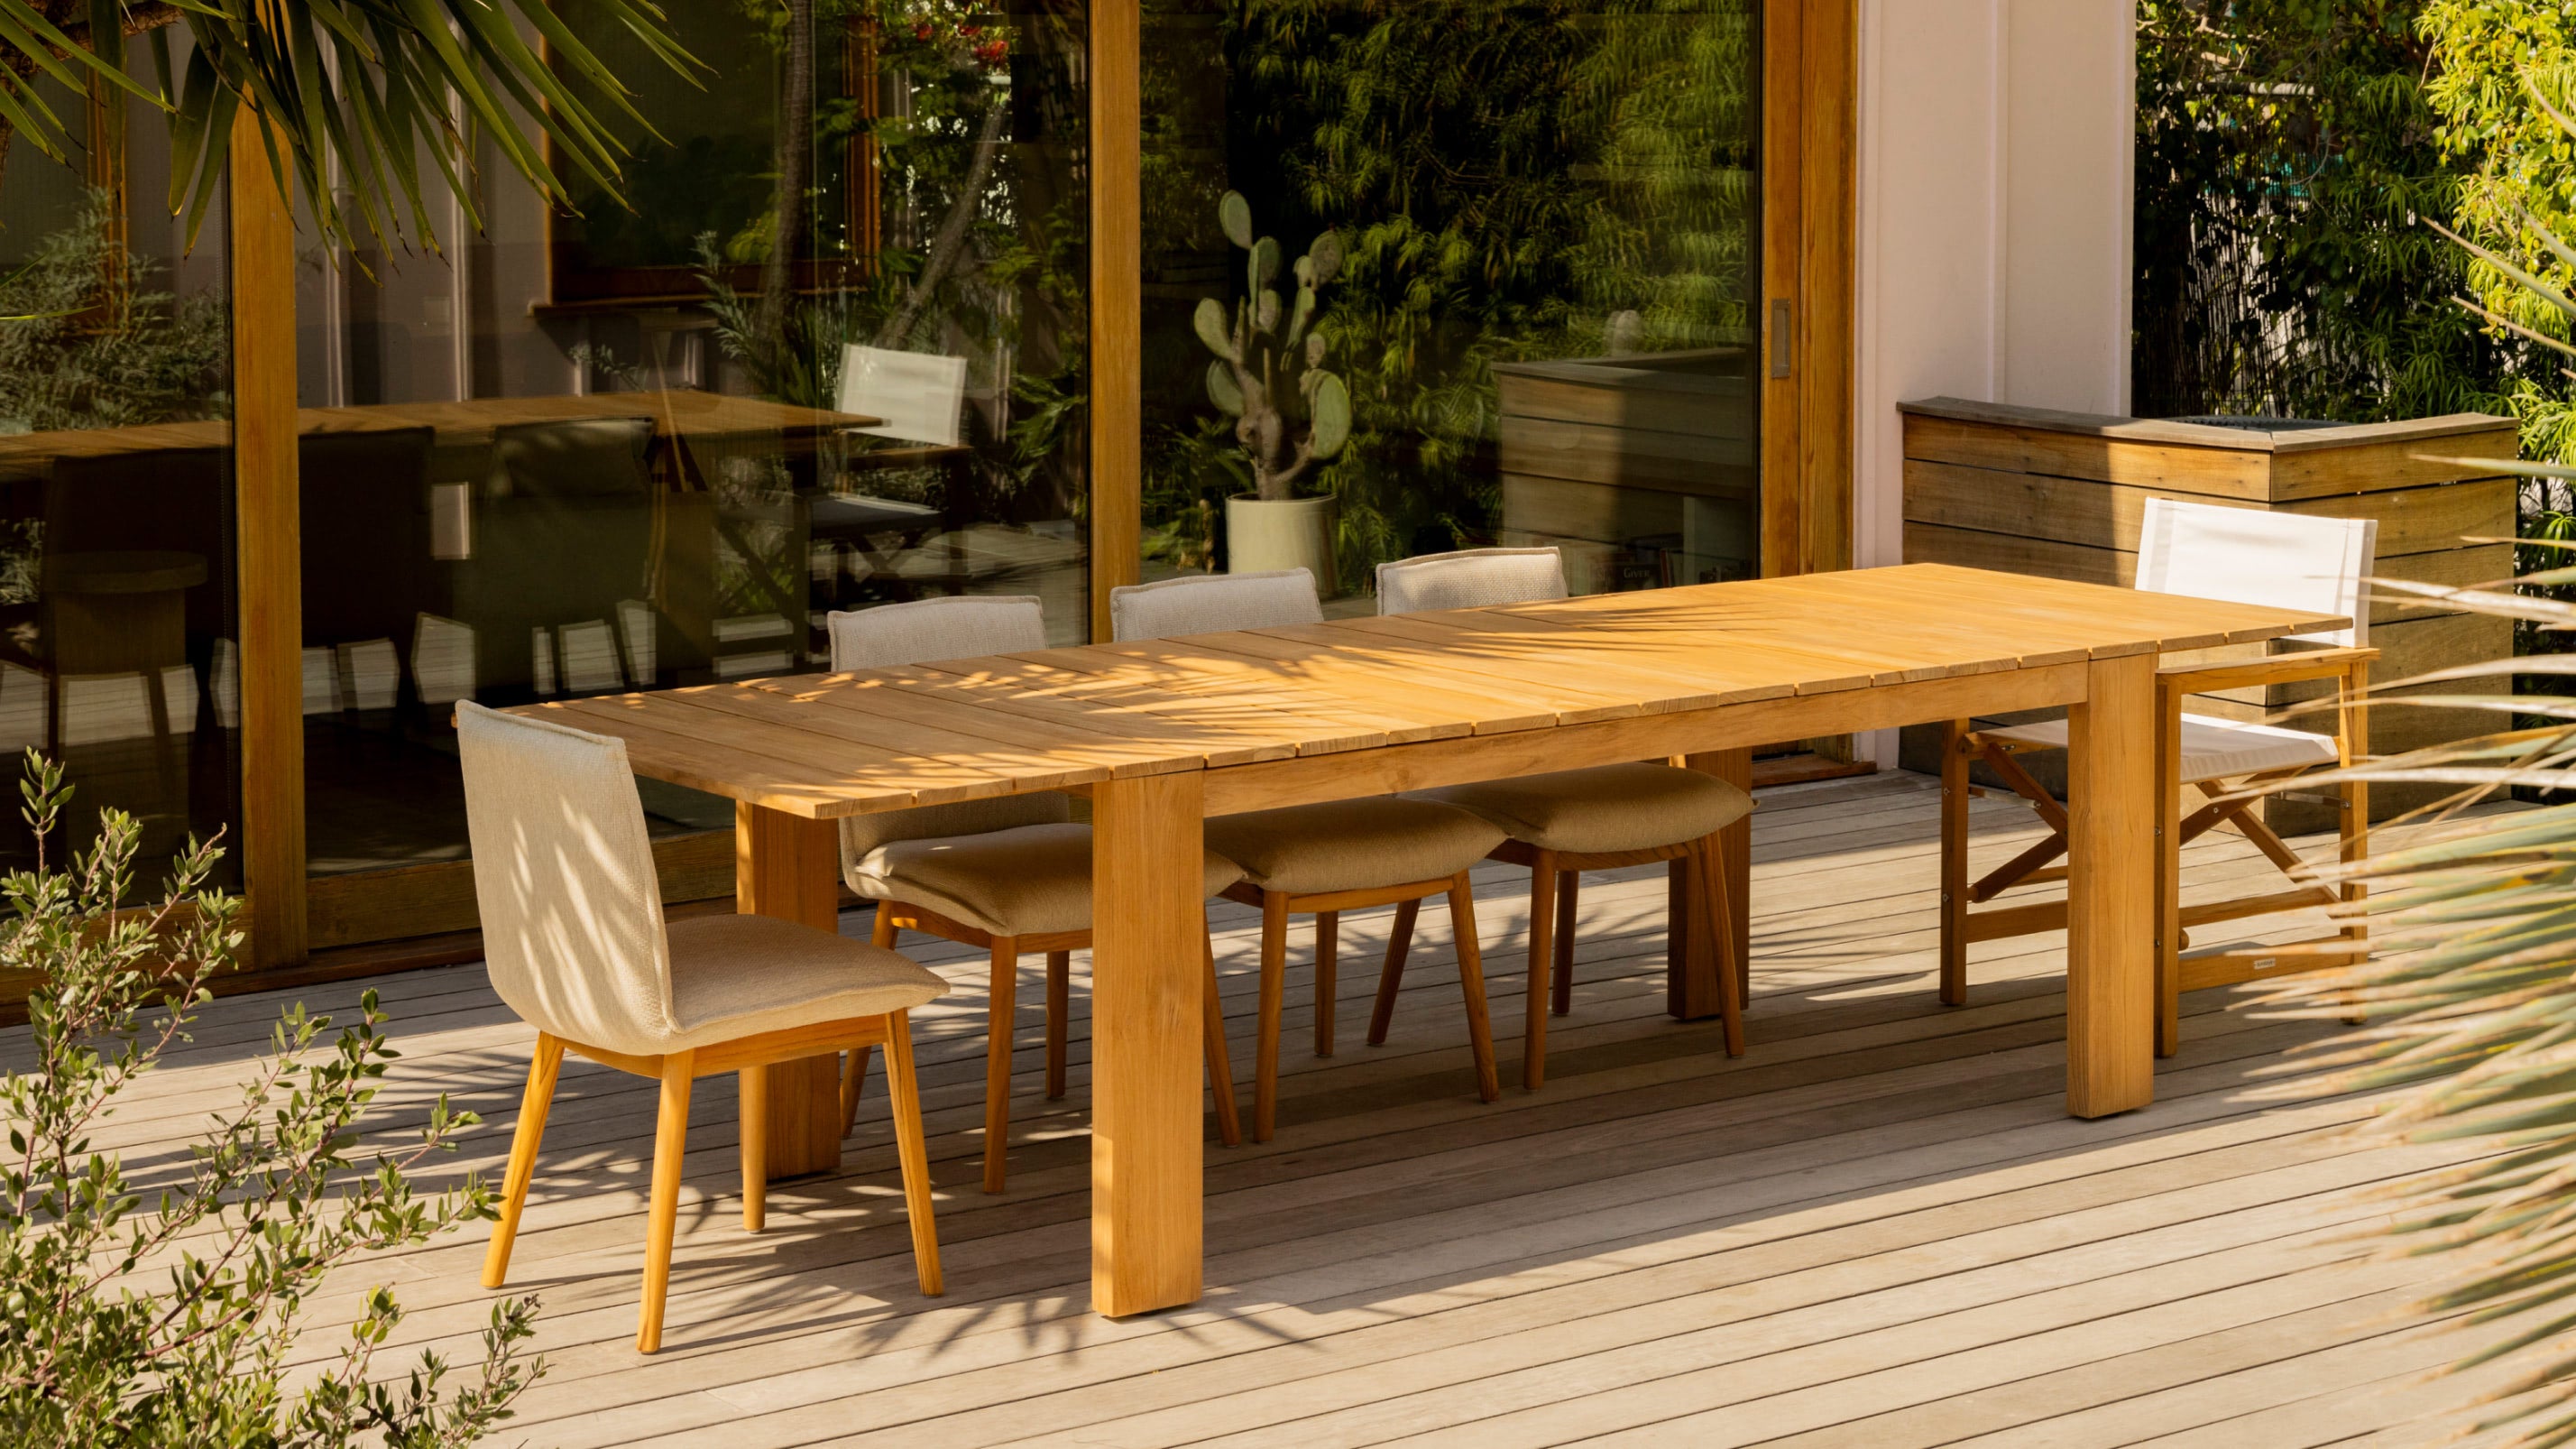 Make Room Outdoor Extendable Dining Table, Seats 6-8 People, Teak - Image 2